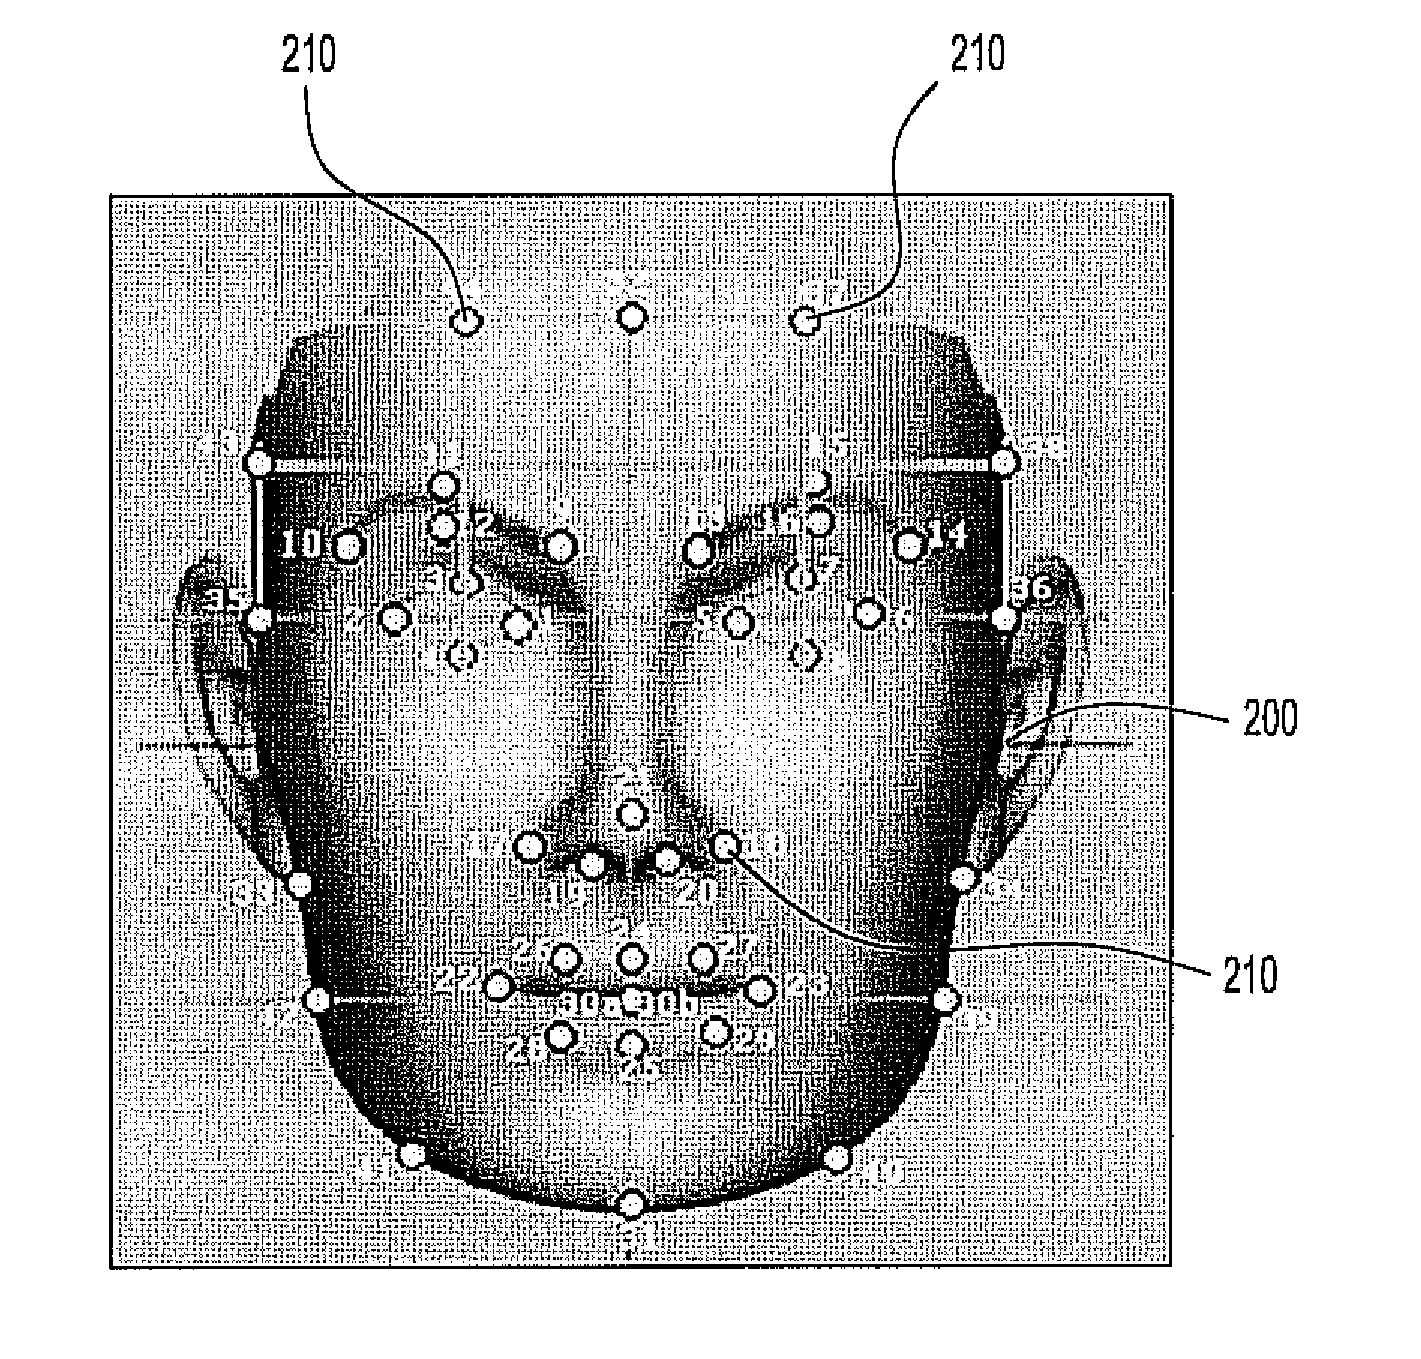 System for rapid detection of drowsiness in a machine operator